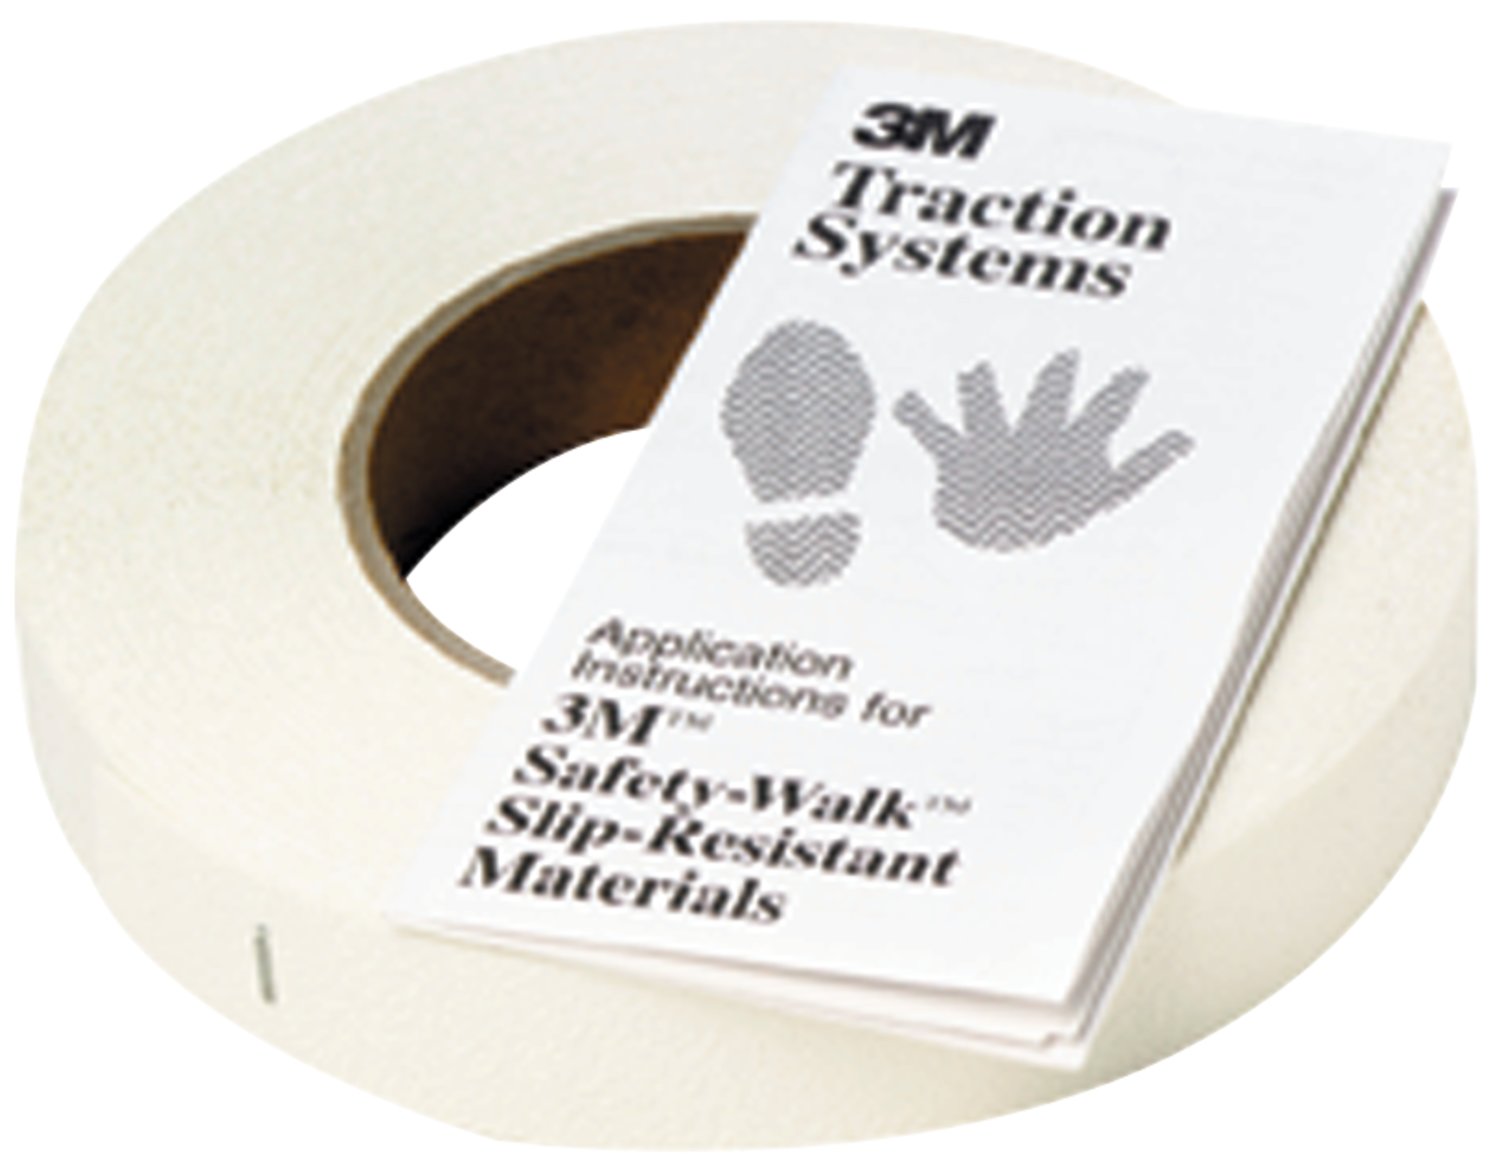 7010340908 - 3M Safety-Walk Slip-Resistant Fine Resilient Tapes and Treads 200,
White, 305 mm x 18 m, 1 Roll/Case